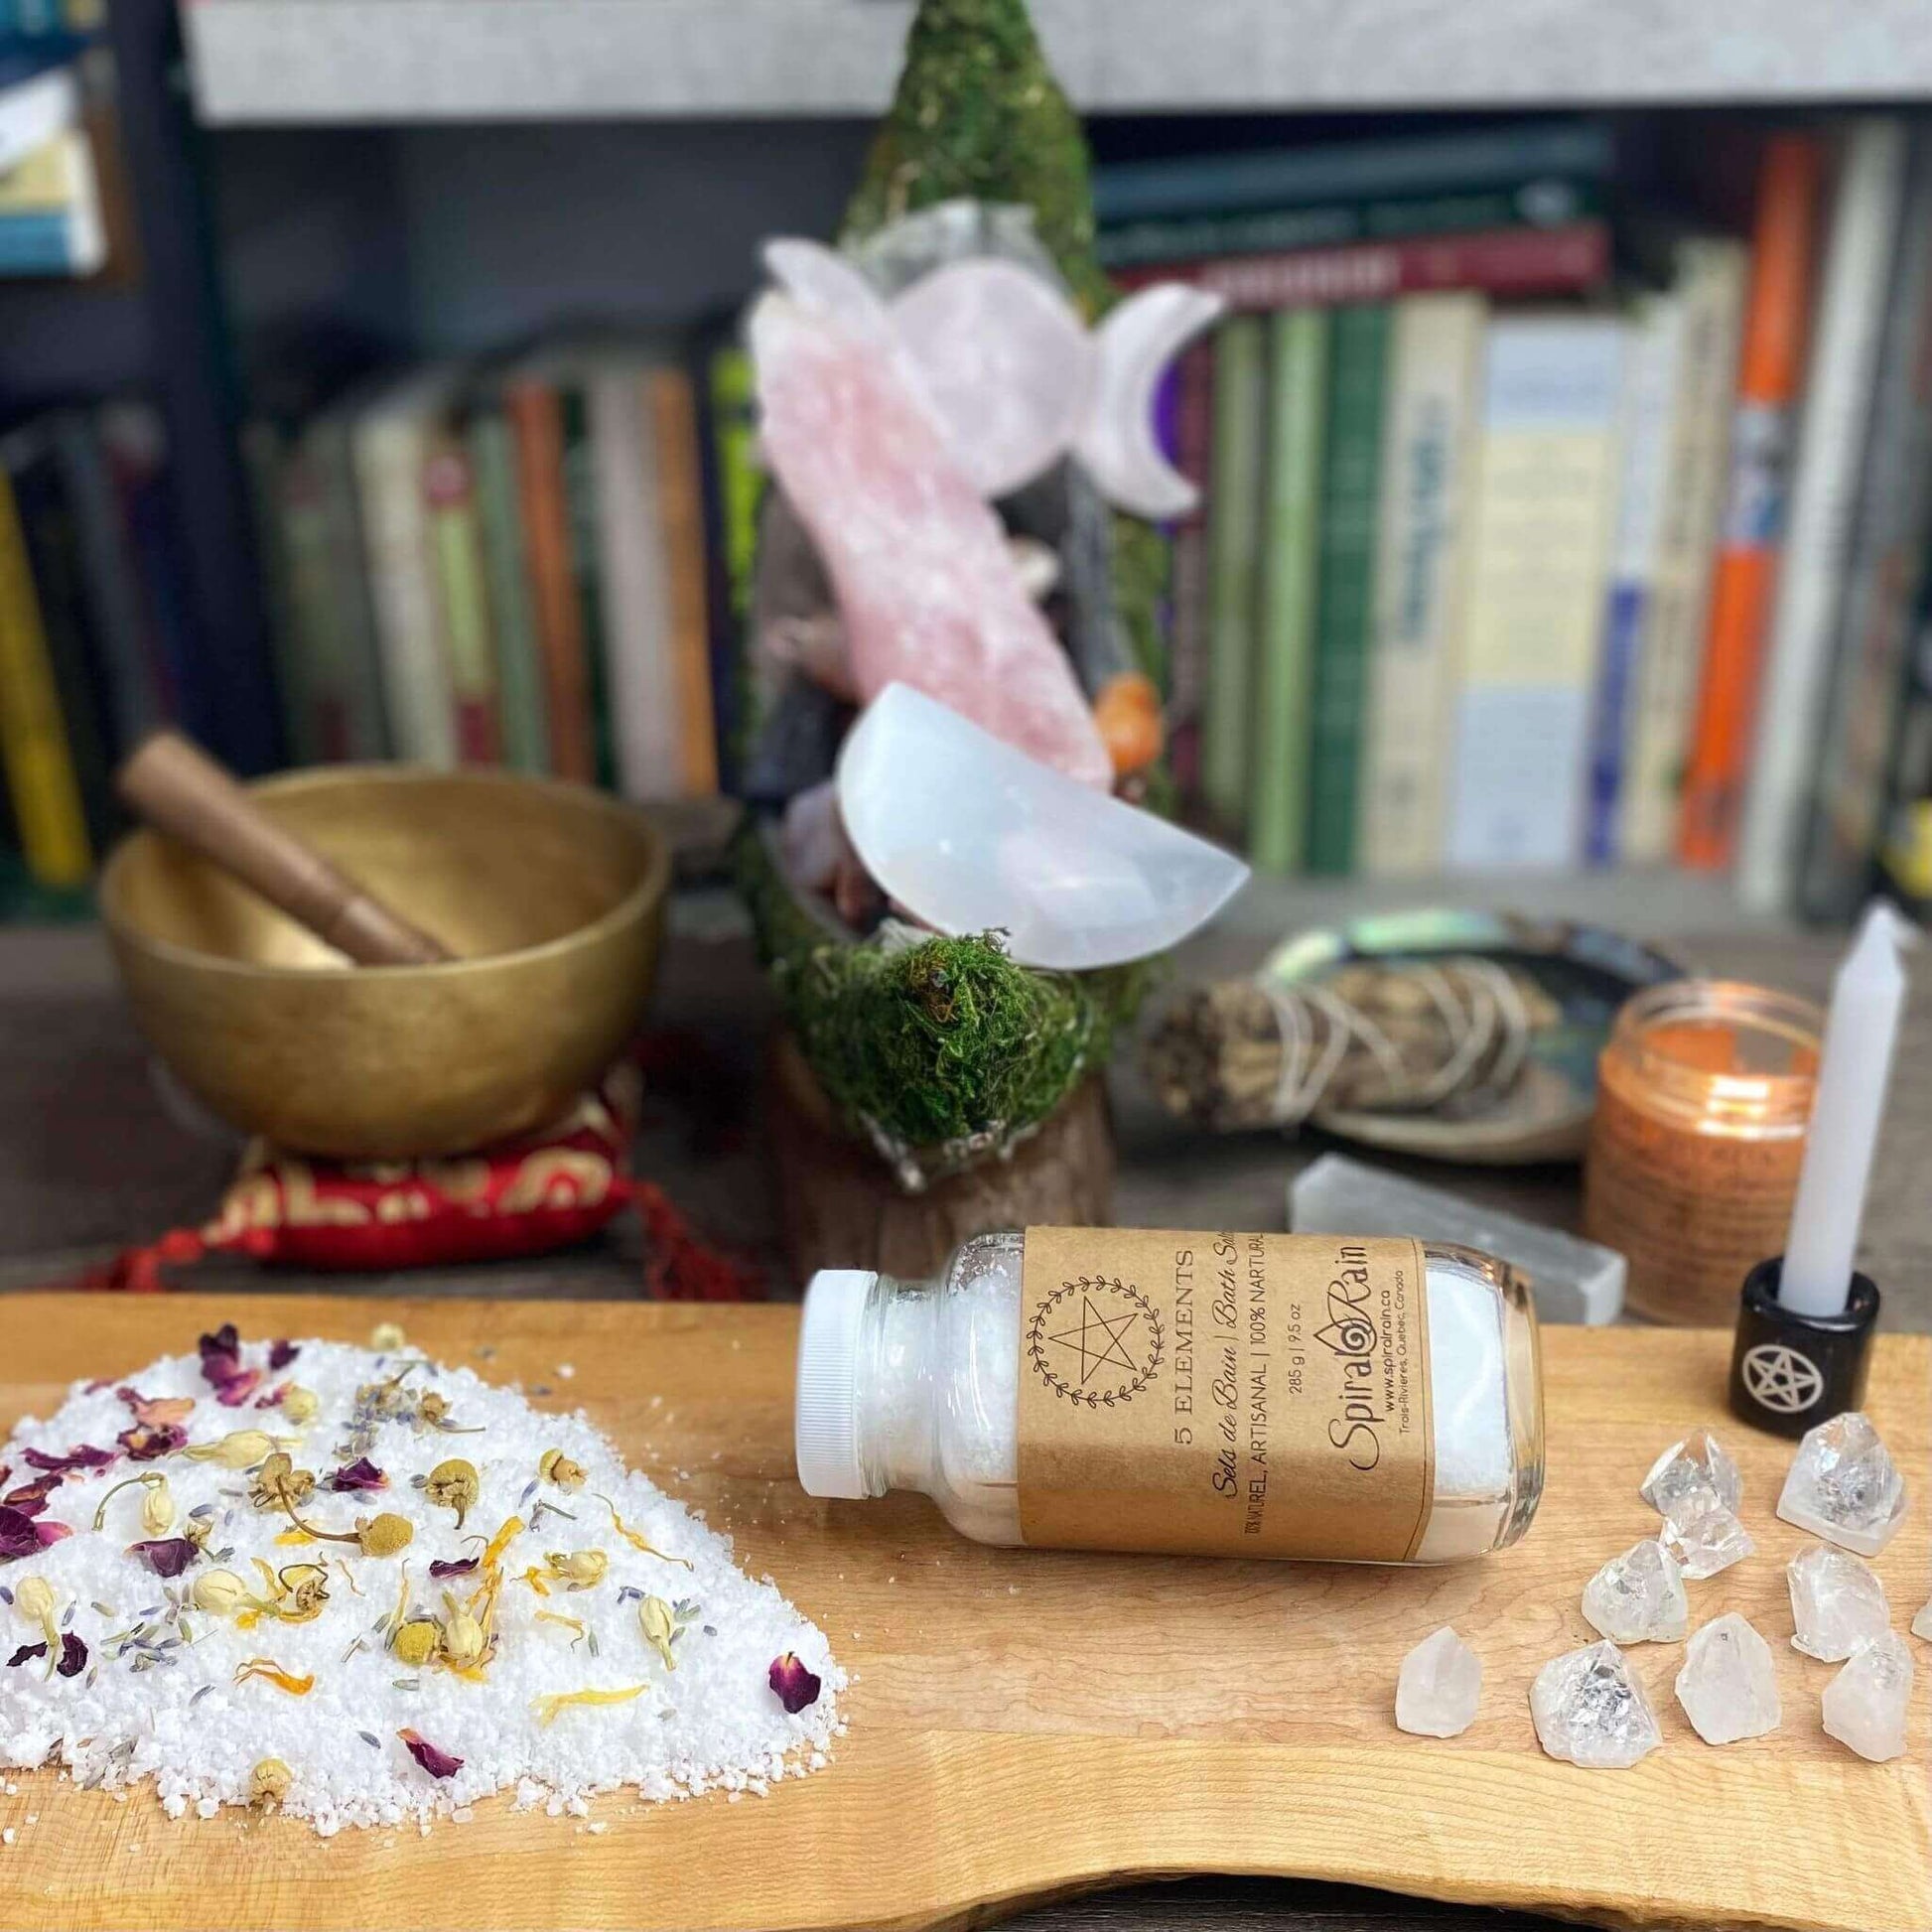 5 Elements bath salts at $20 only from Spiral Rain